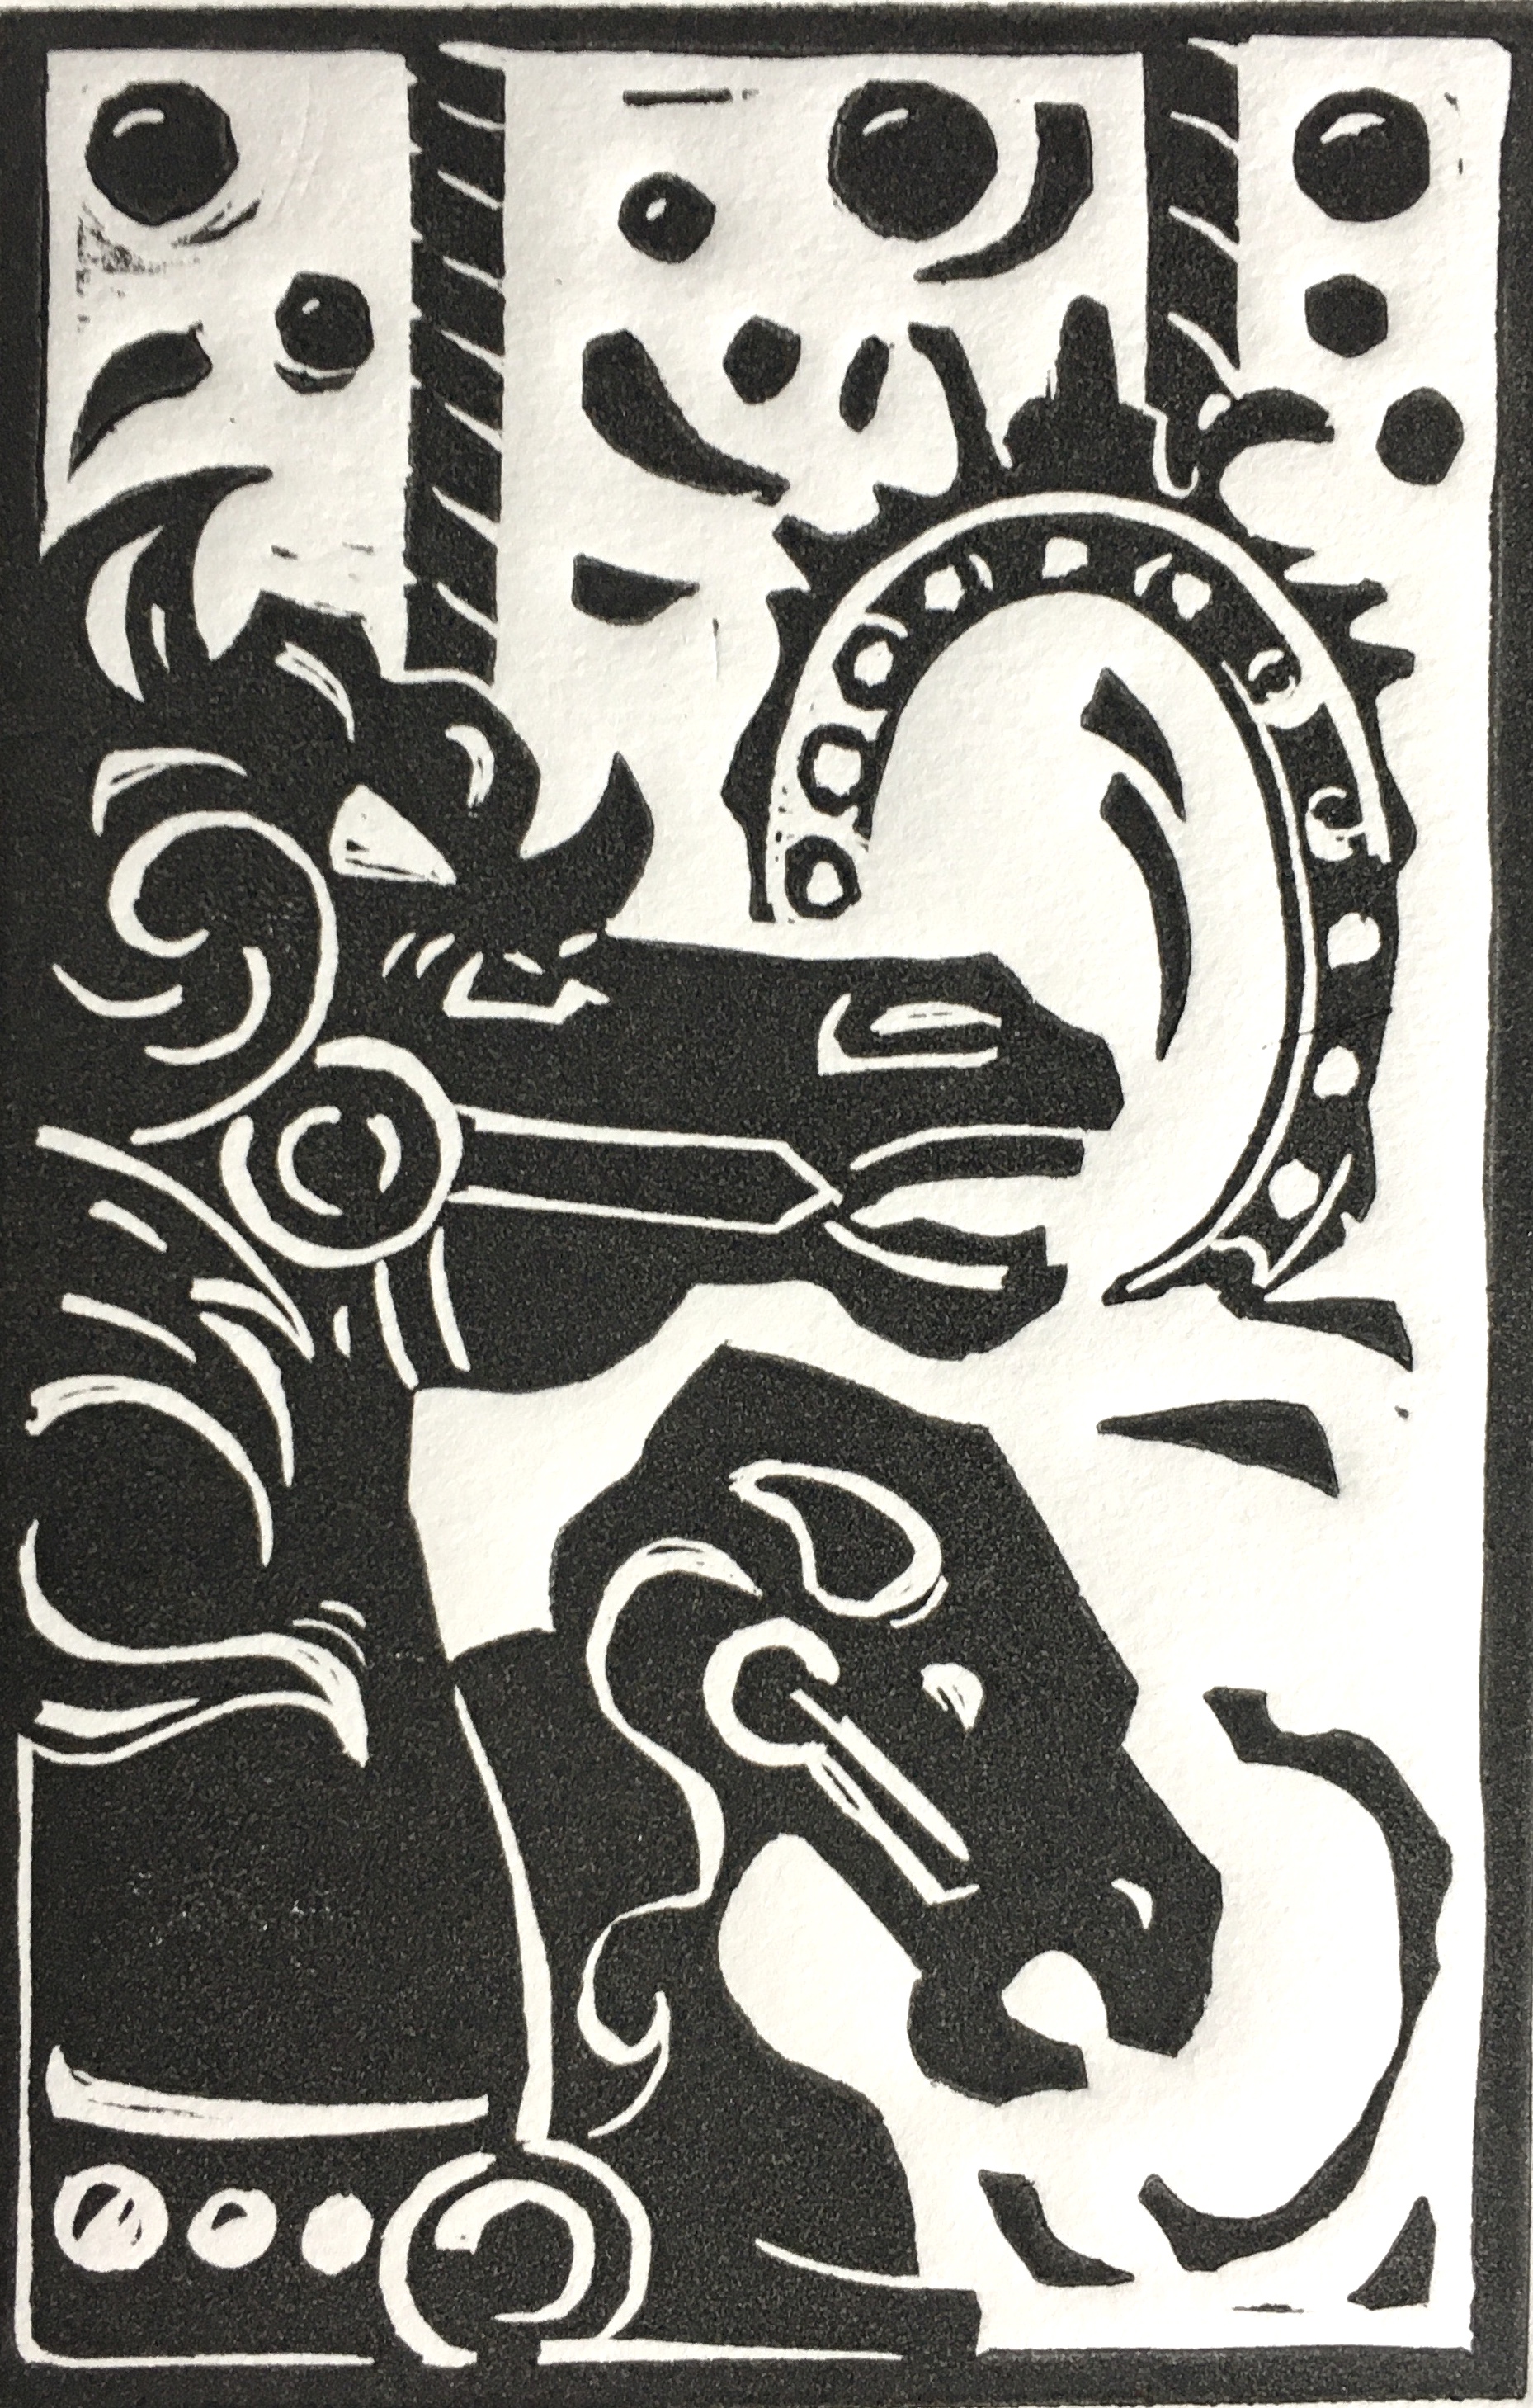 Black and white Linocut print depicting a carousel at Seattle Center